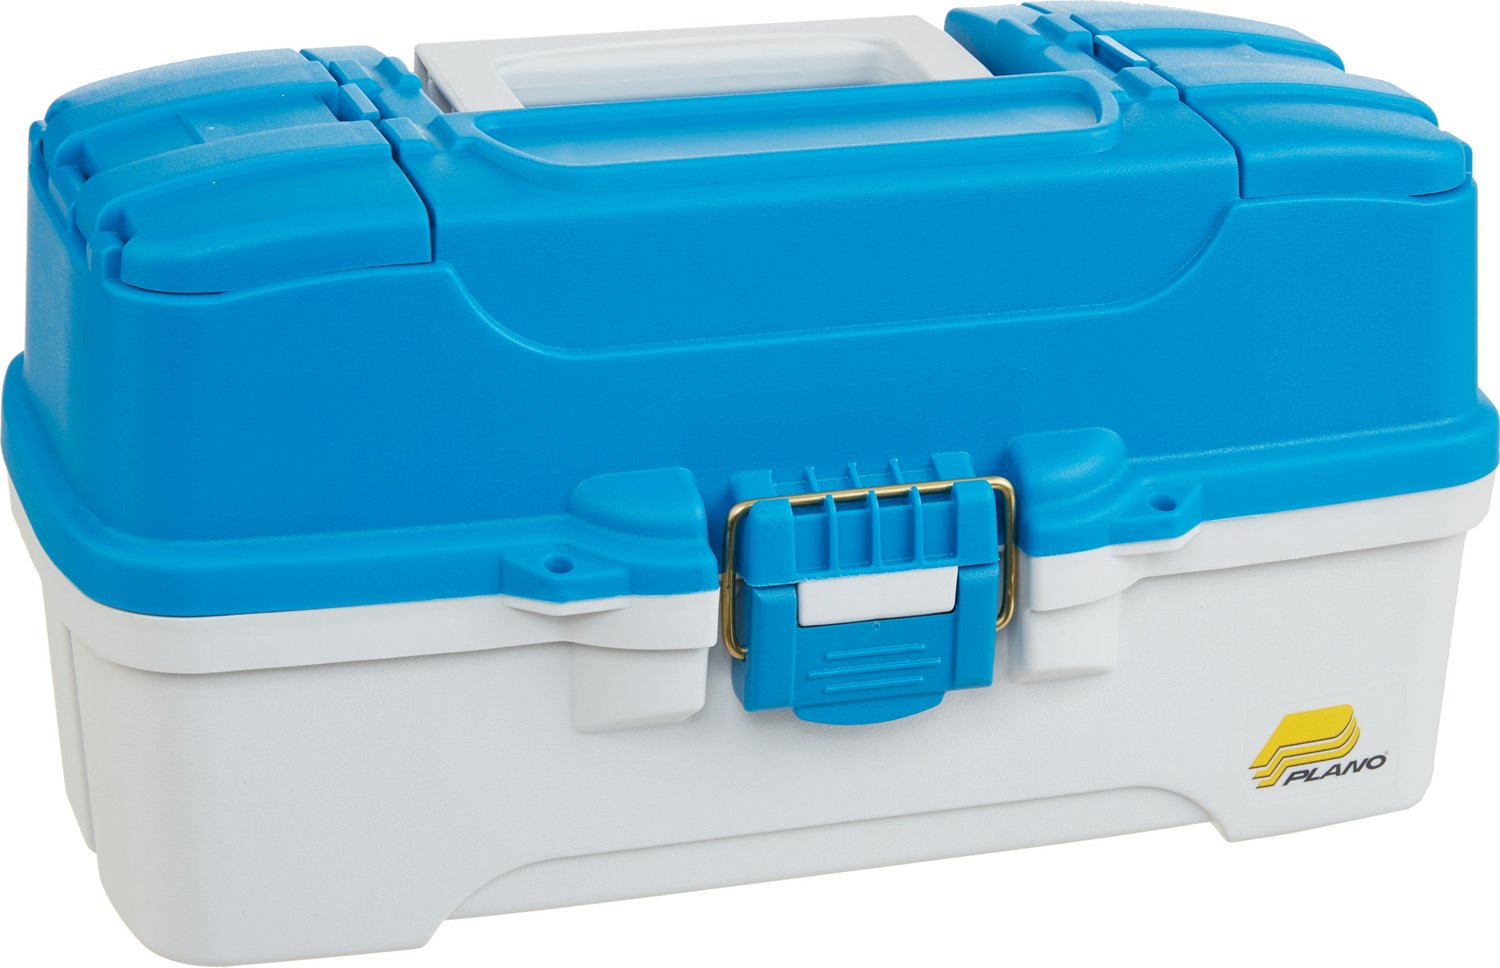 Fishing Single Tray Tackle Box- 55 Piece Tackle Gear Kit Includes